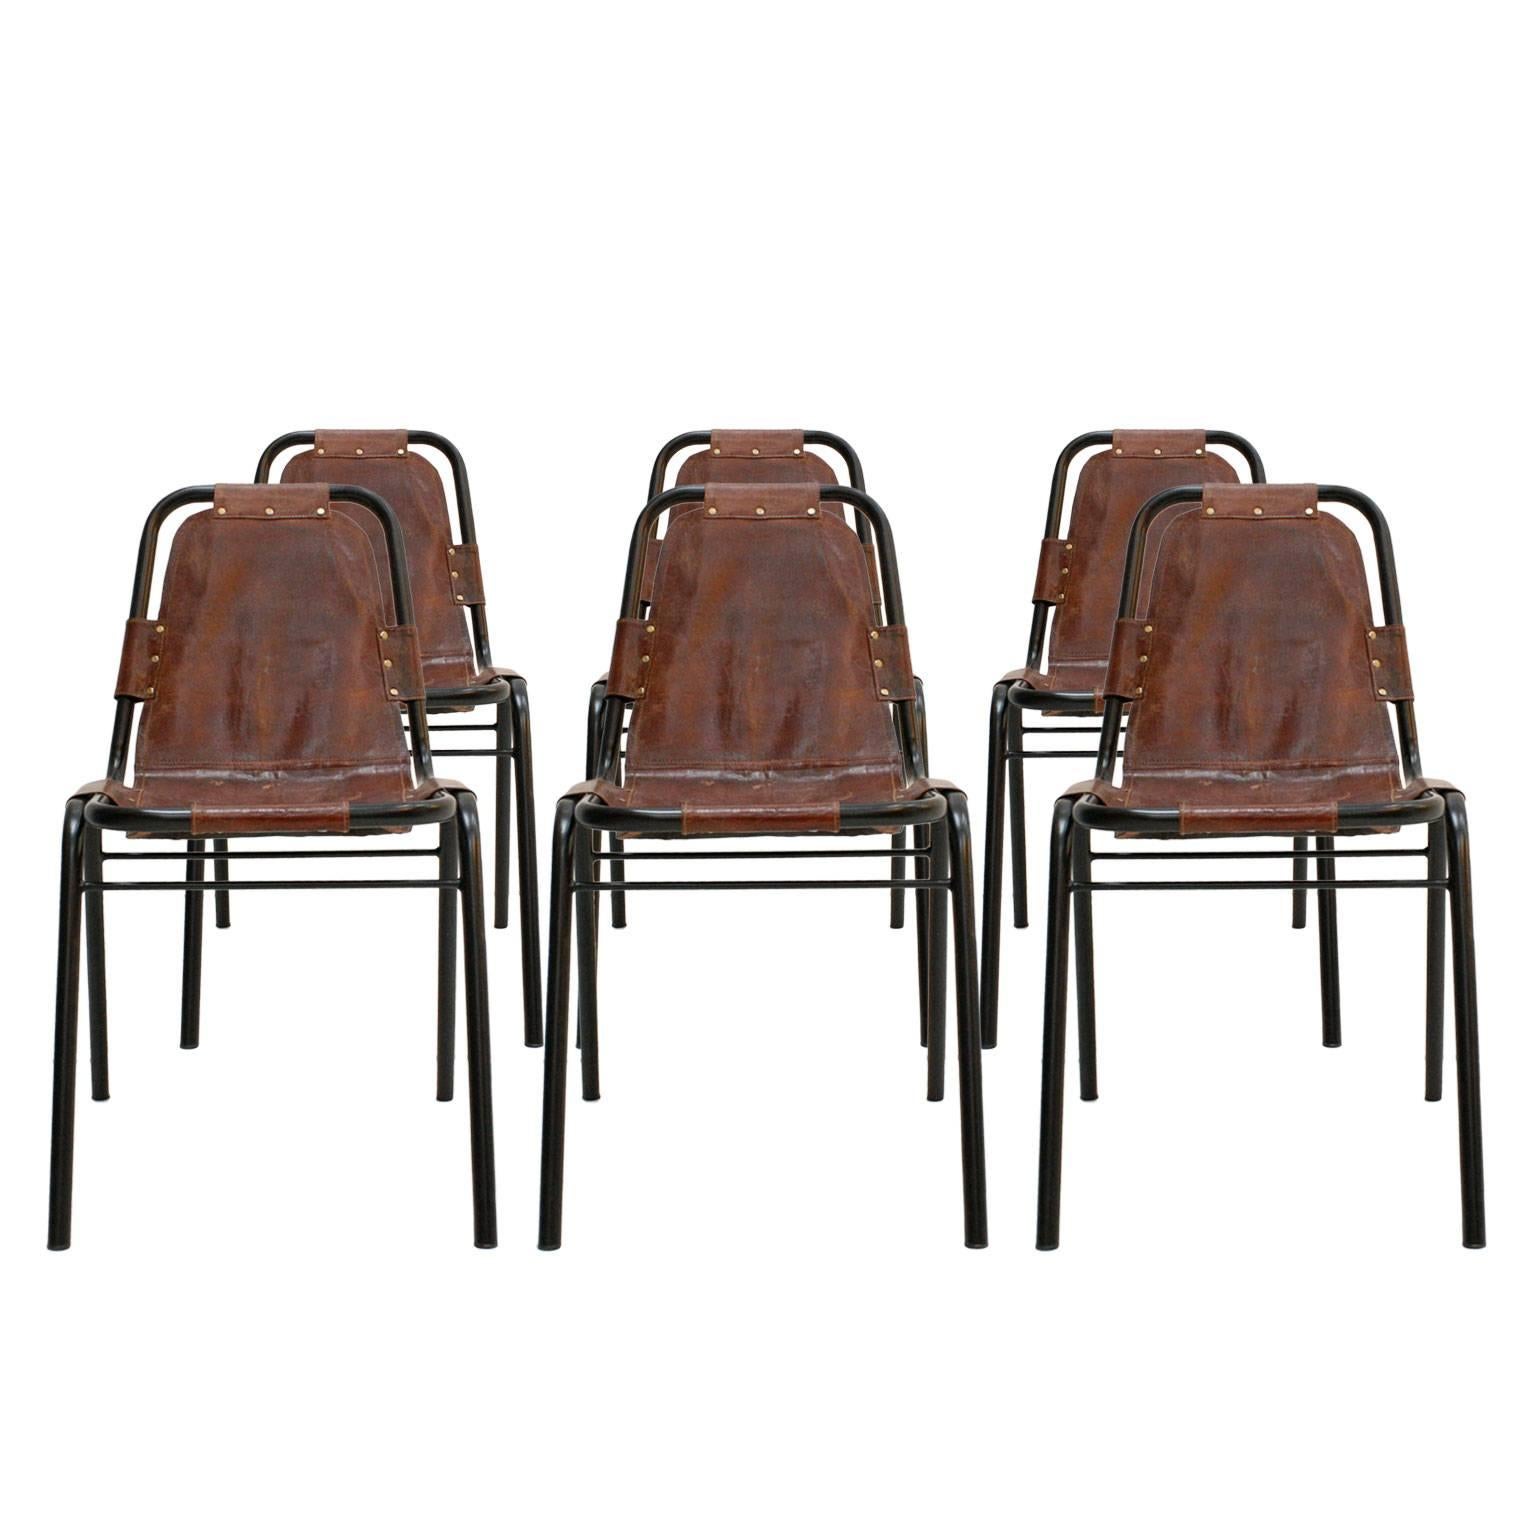 Set of ten chairs mod. "Les Arcs", with tubular structure in black, lacquered steel with seat made of leather, in the style of Charlotte Perriand, France, 1970s.